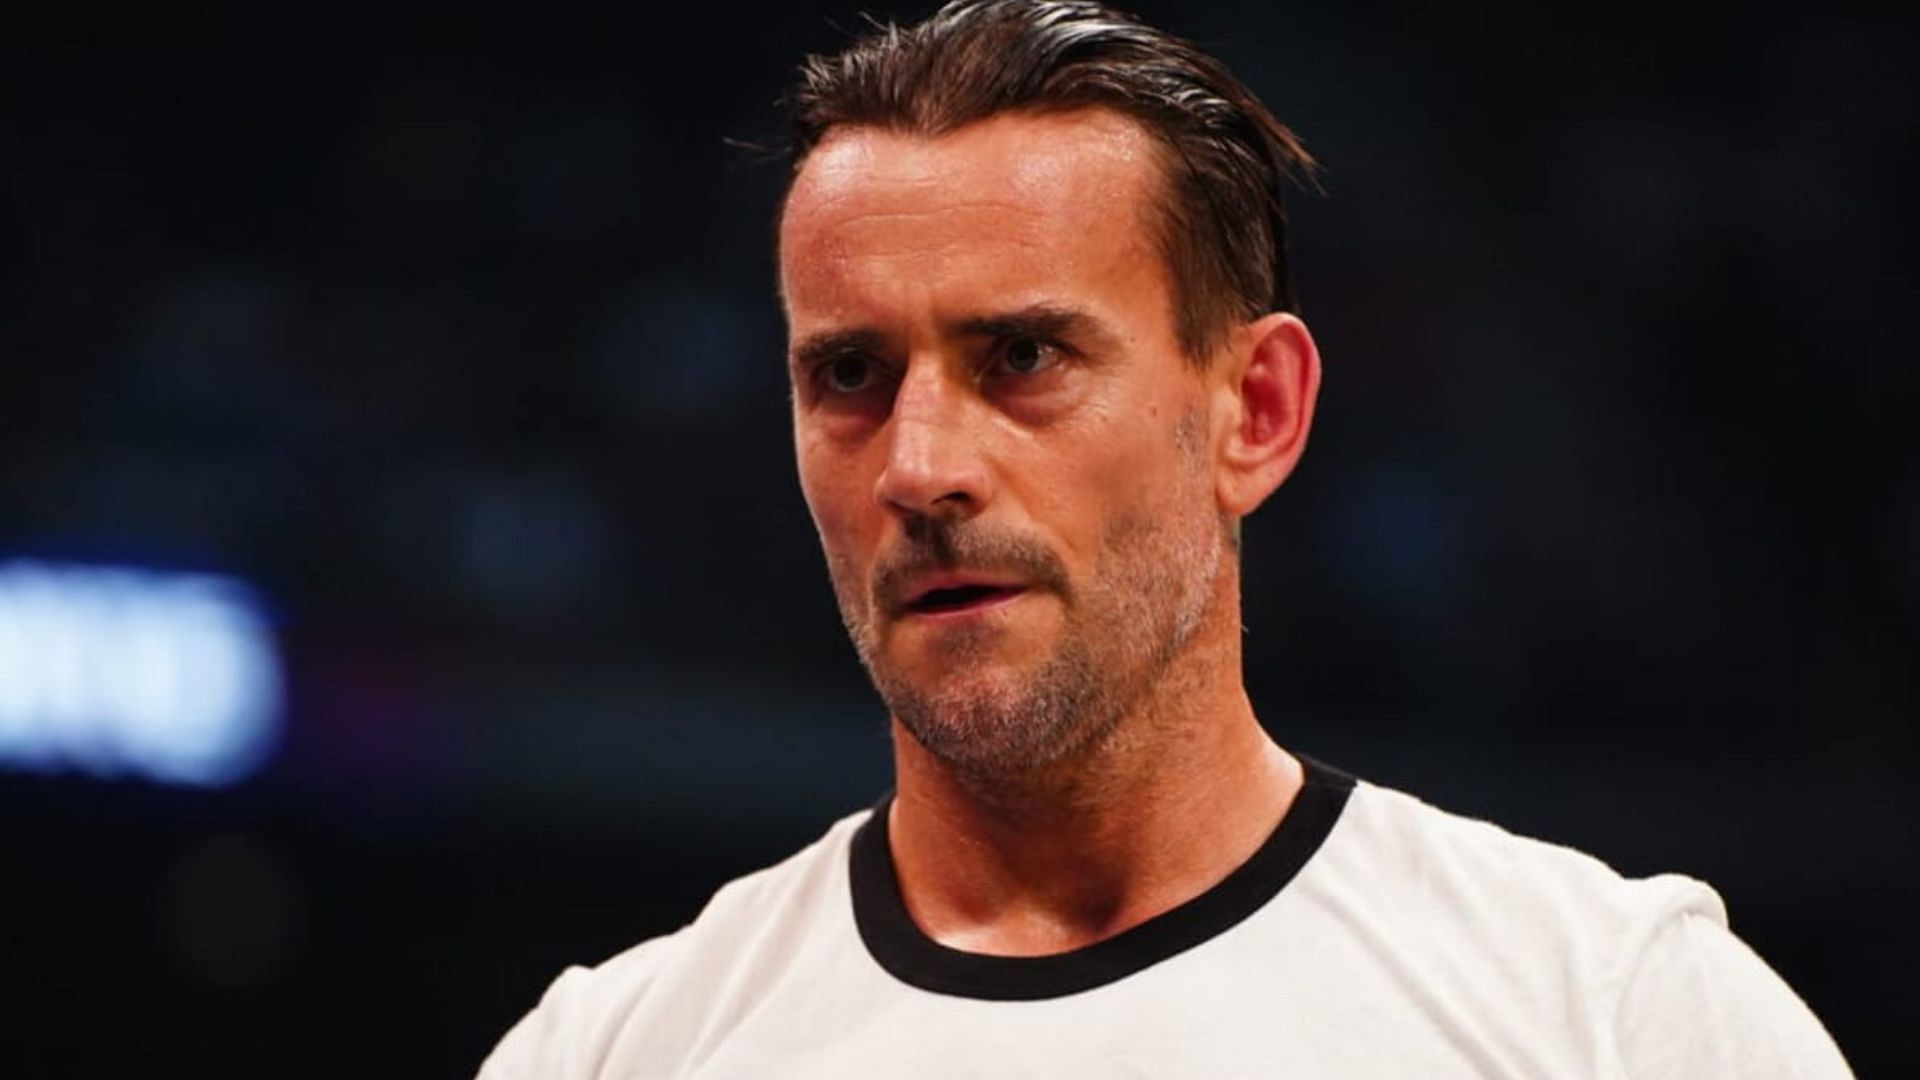 AEW star CM Punk could end up working alongside real-life rival - reports